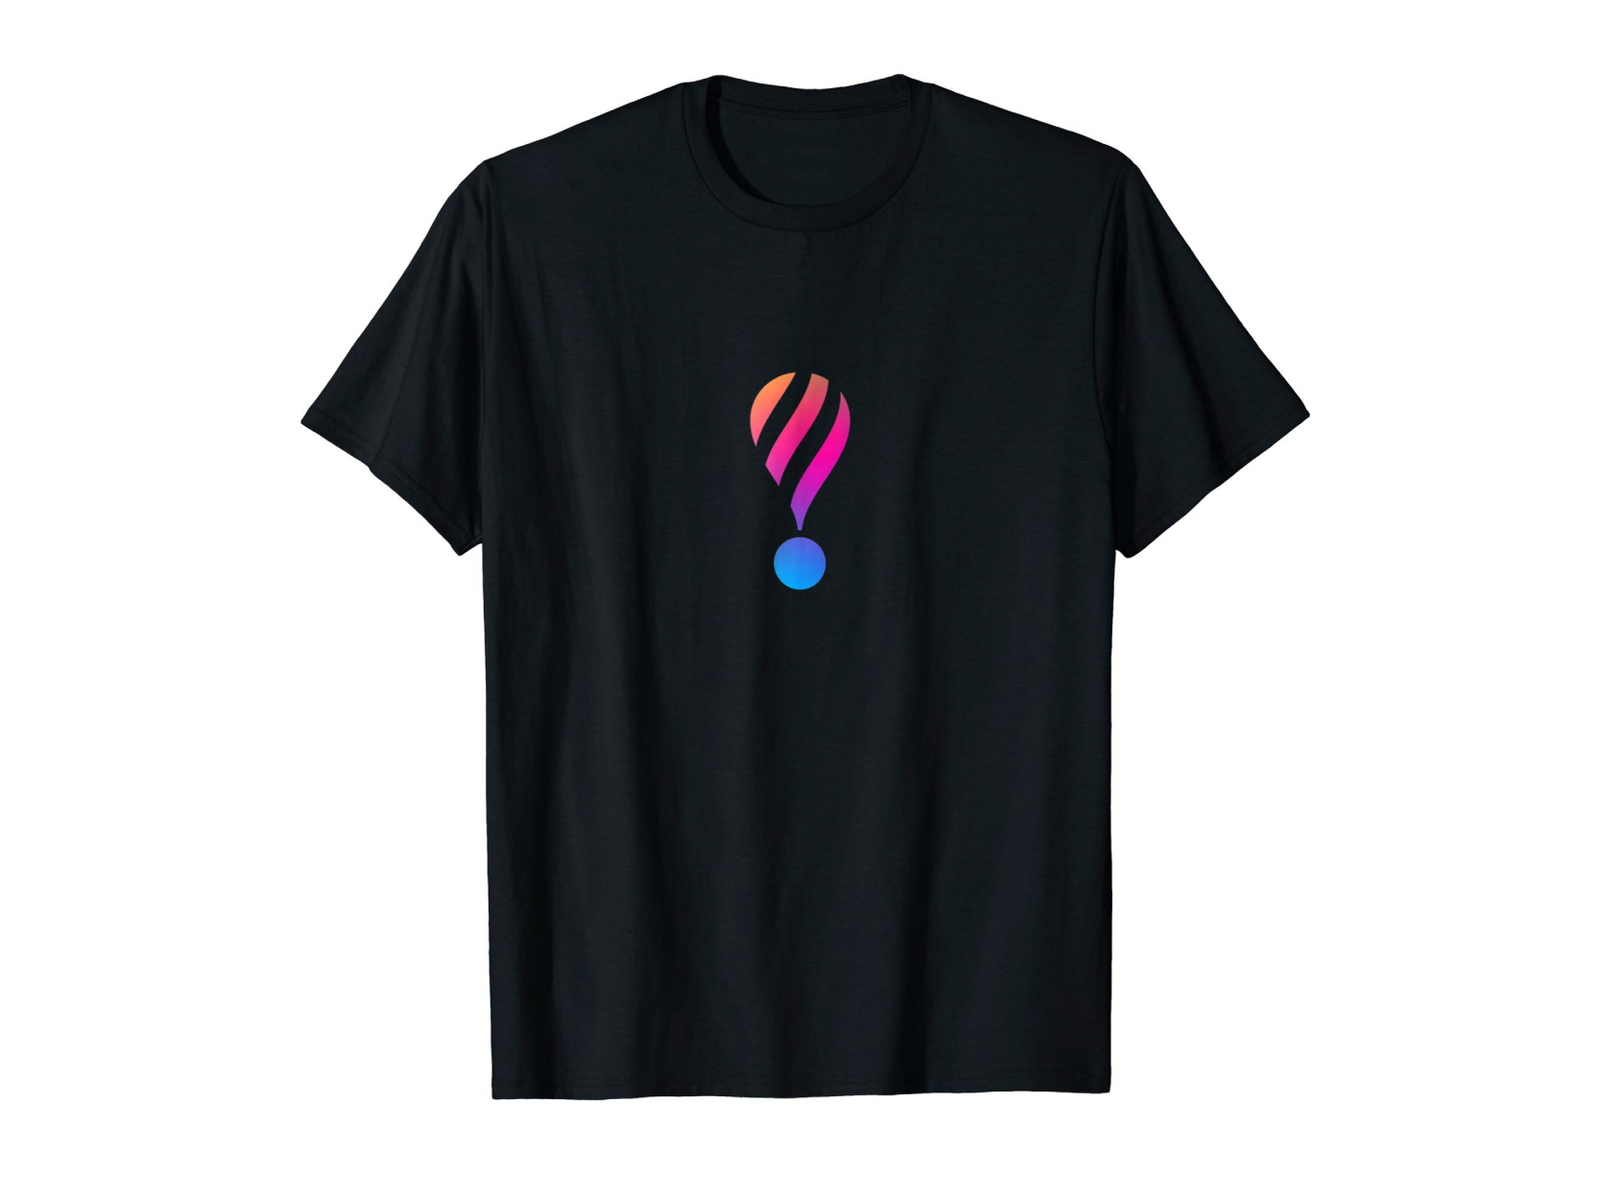 Hot Air Balloon T-shirt, Exclamation Mark T-shirt by MadeByBono on Dribbble